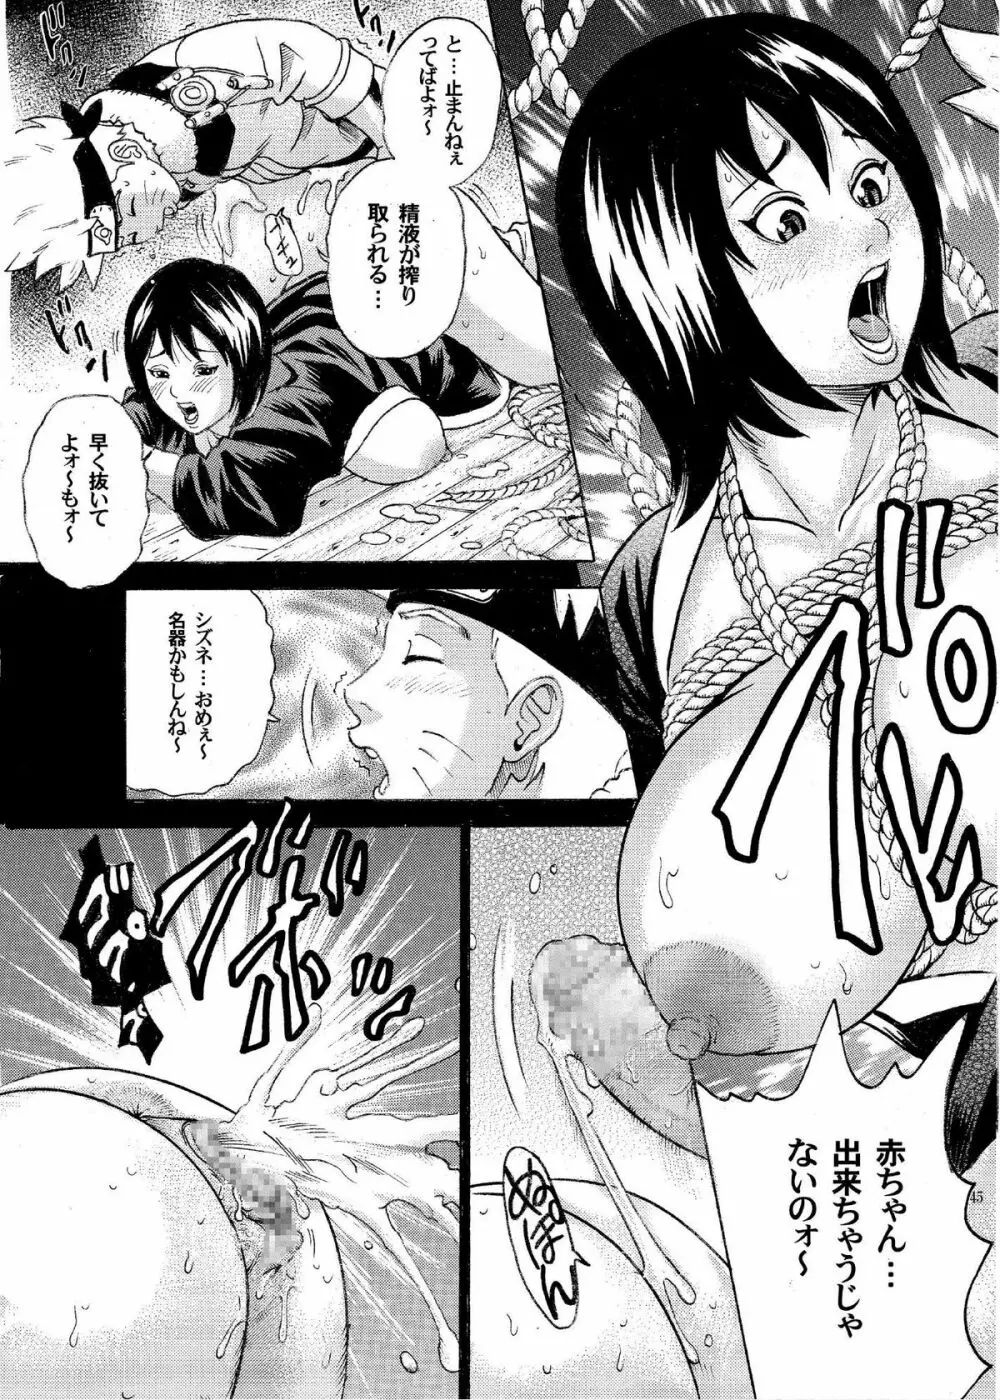 ParM SpeciaL 1 淫忍試験 - page43